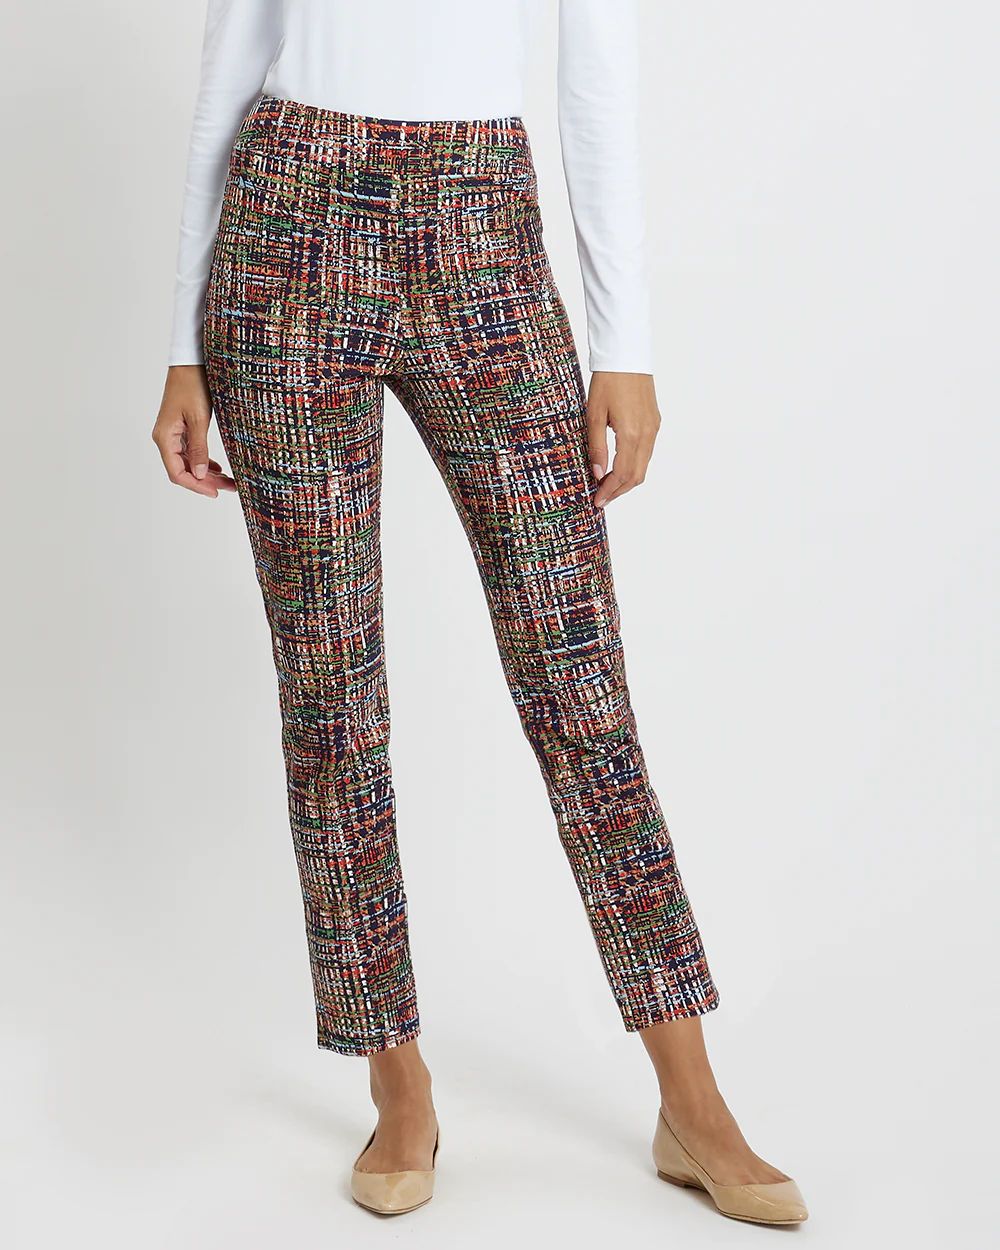 Lucia Pant - Ponte Knit | Jude Connally